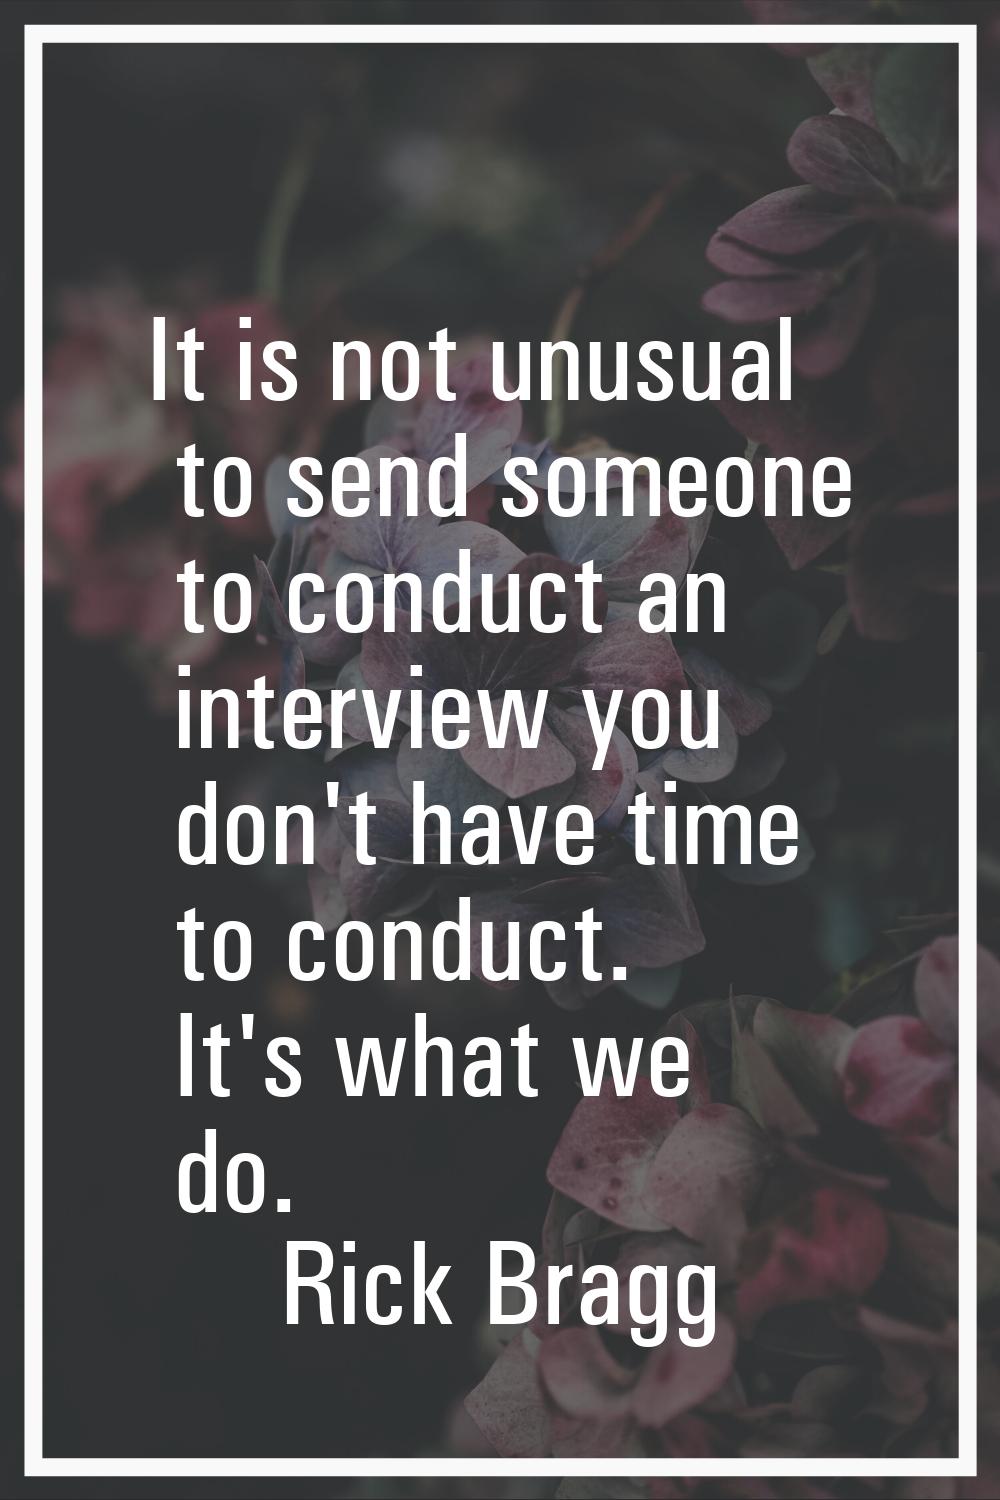 It is not unusual to send someone to conduct an interview you don't have time to conduct. It's what